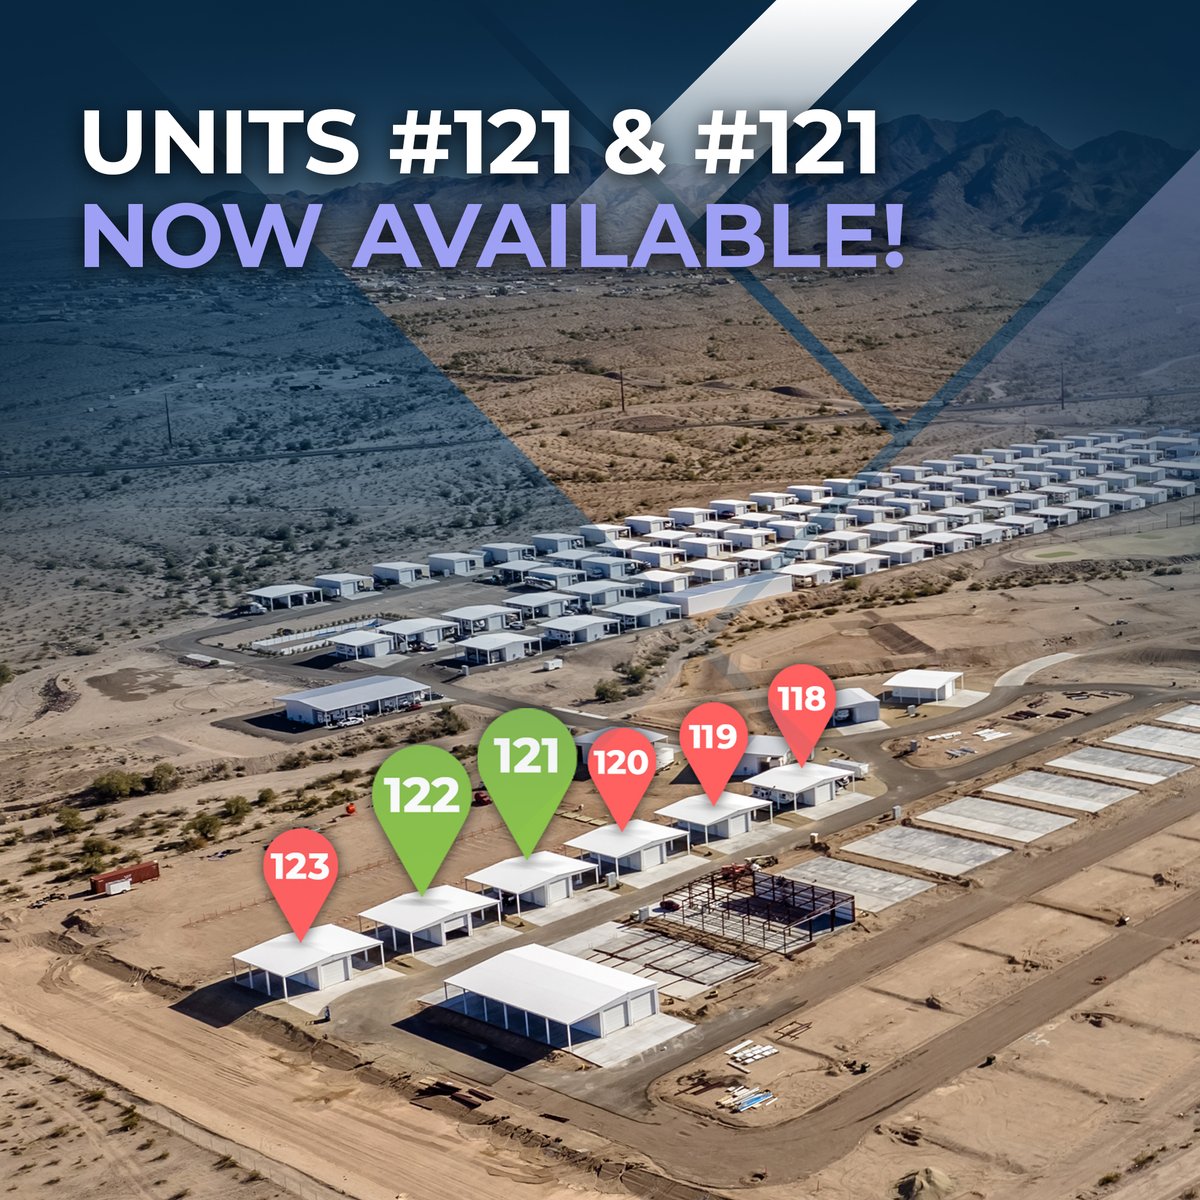 Riverbound Phase ll Units #121 and #122 are waiting for you and yours. Both are move in ready right now. Build your Dream Man-Cave or She-Shed today! Call APX Real Estate Group for a VIP tour today. (928) 298-3656 RiverboundCustomStorage.com #rvlife #rvliving #mancave #sheshed